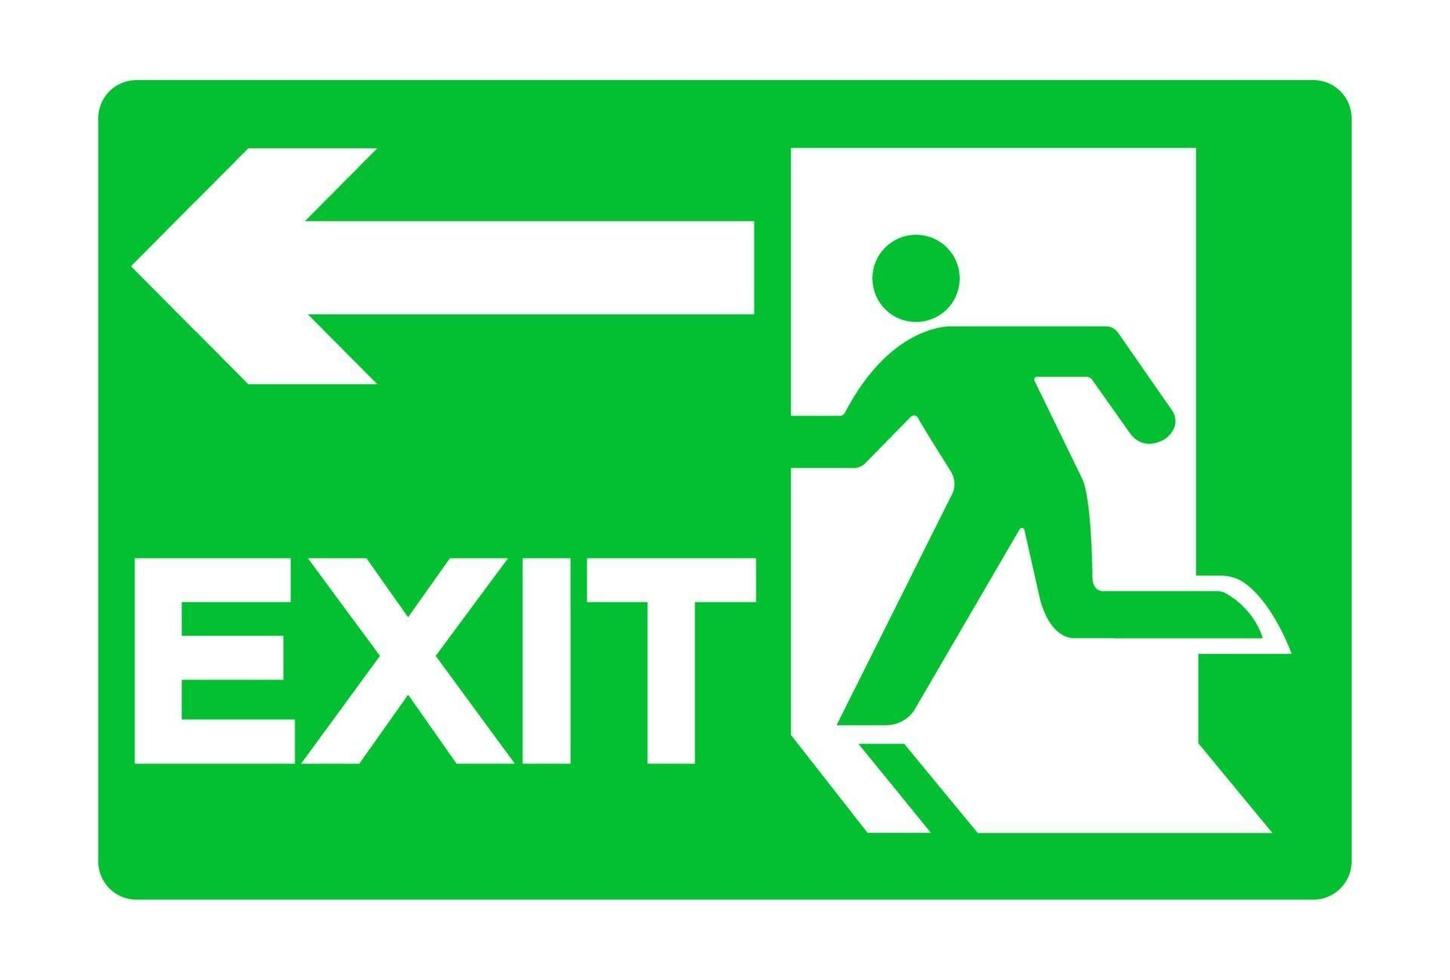 exit-emergency-green-sign-isolate-on-white-background-vector-illustration-eps-10-2261253-vector